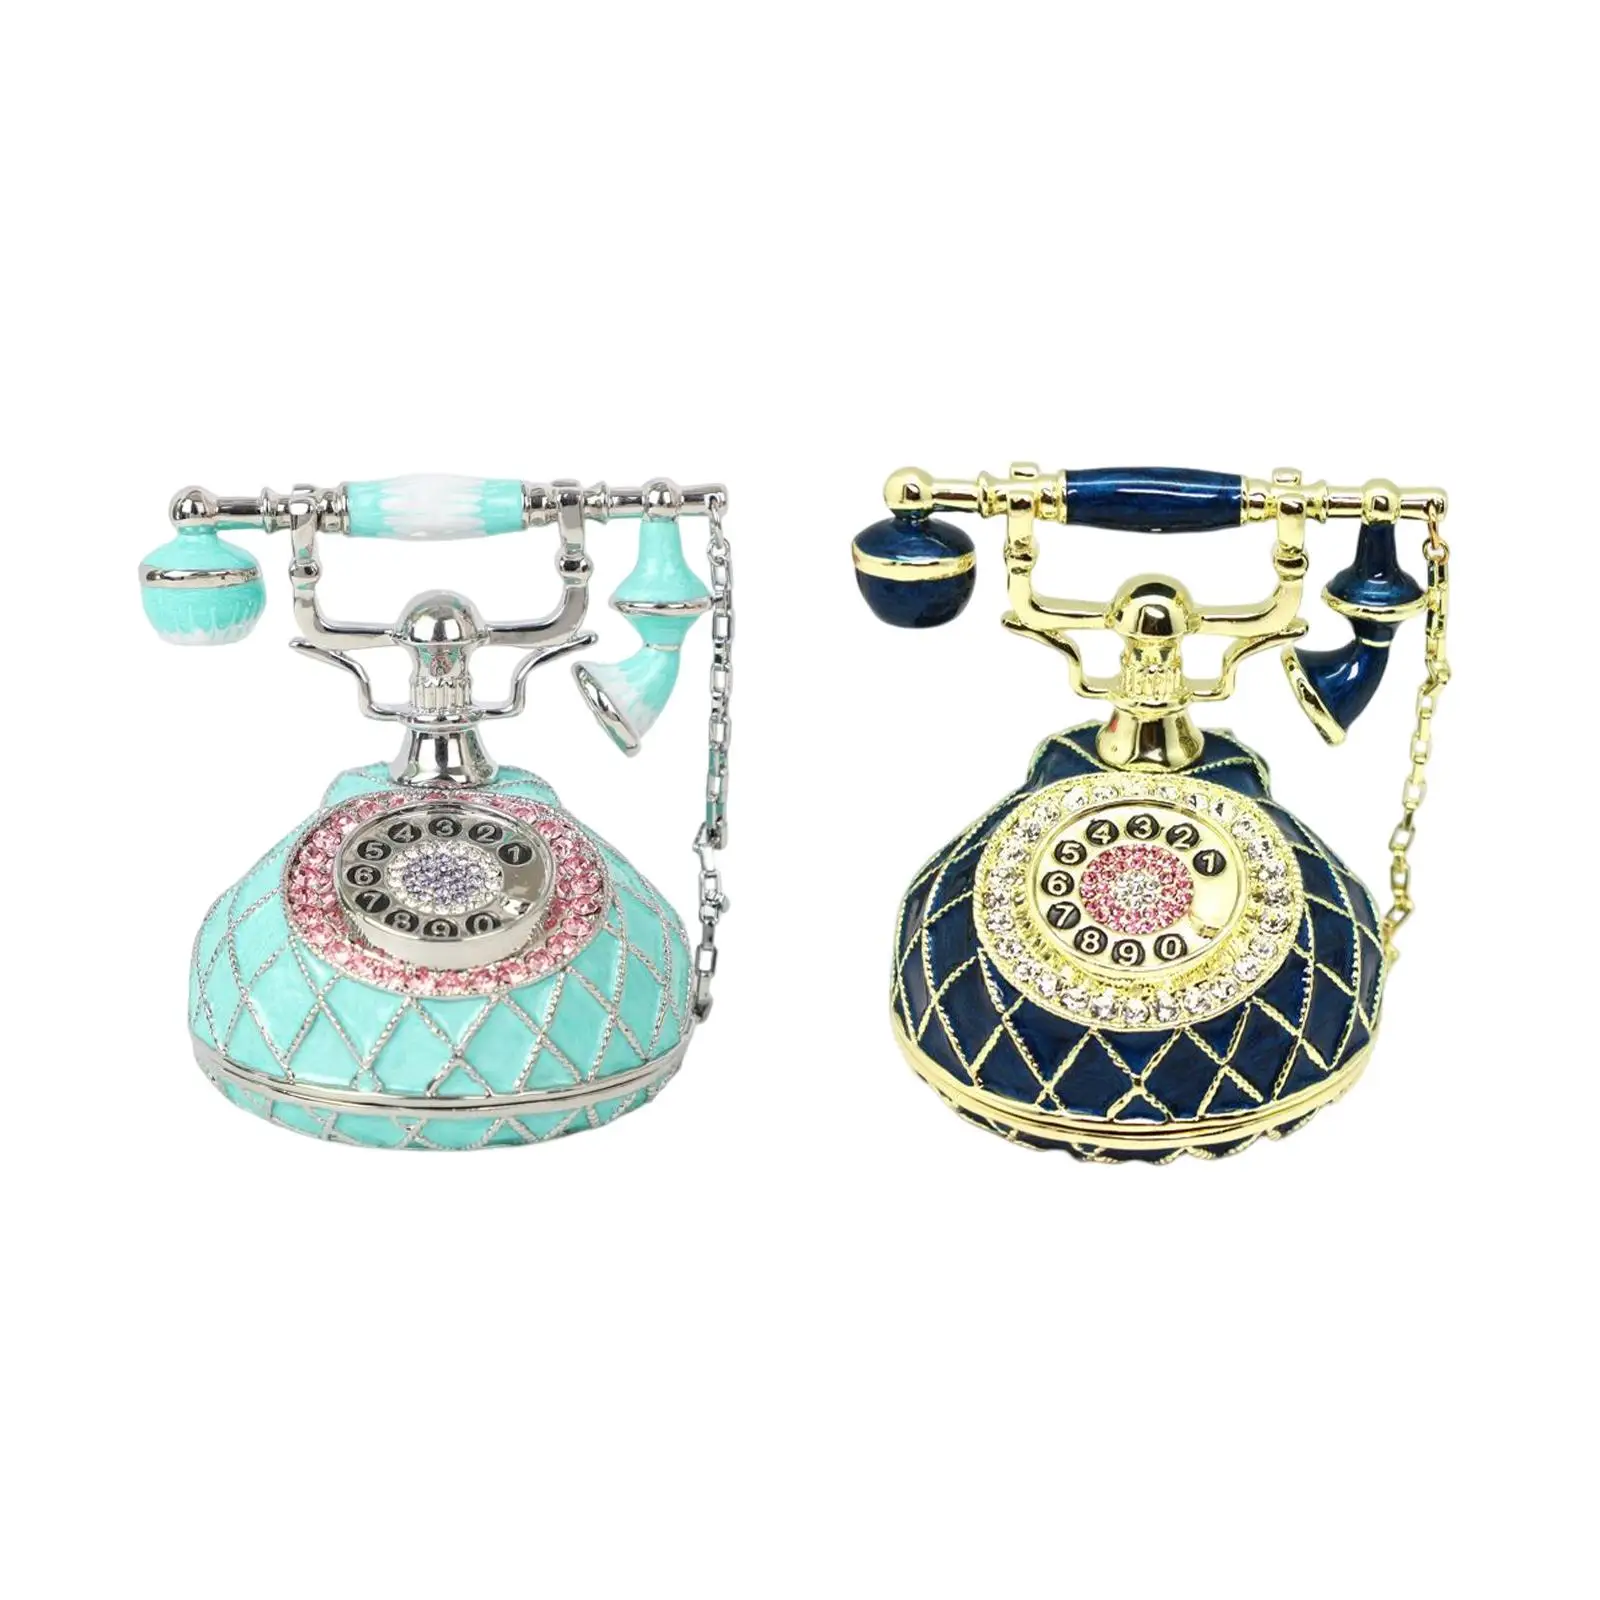 Vintage Style Telephone Statue Jewelry Box Decorative Hinged for Rings Watch